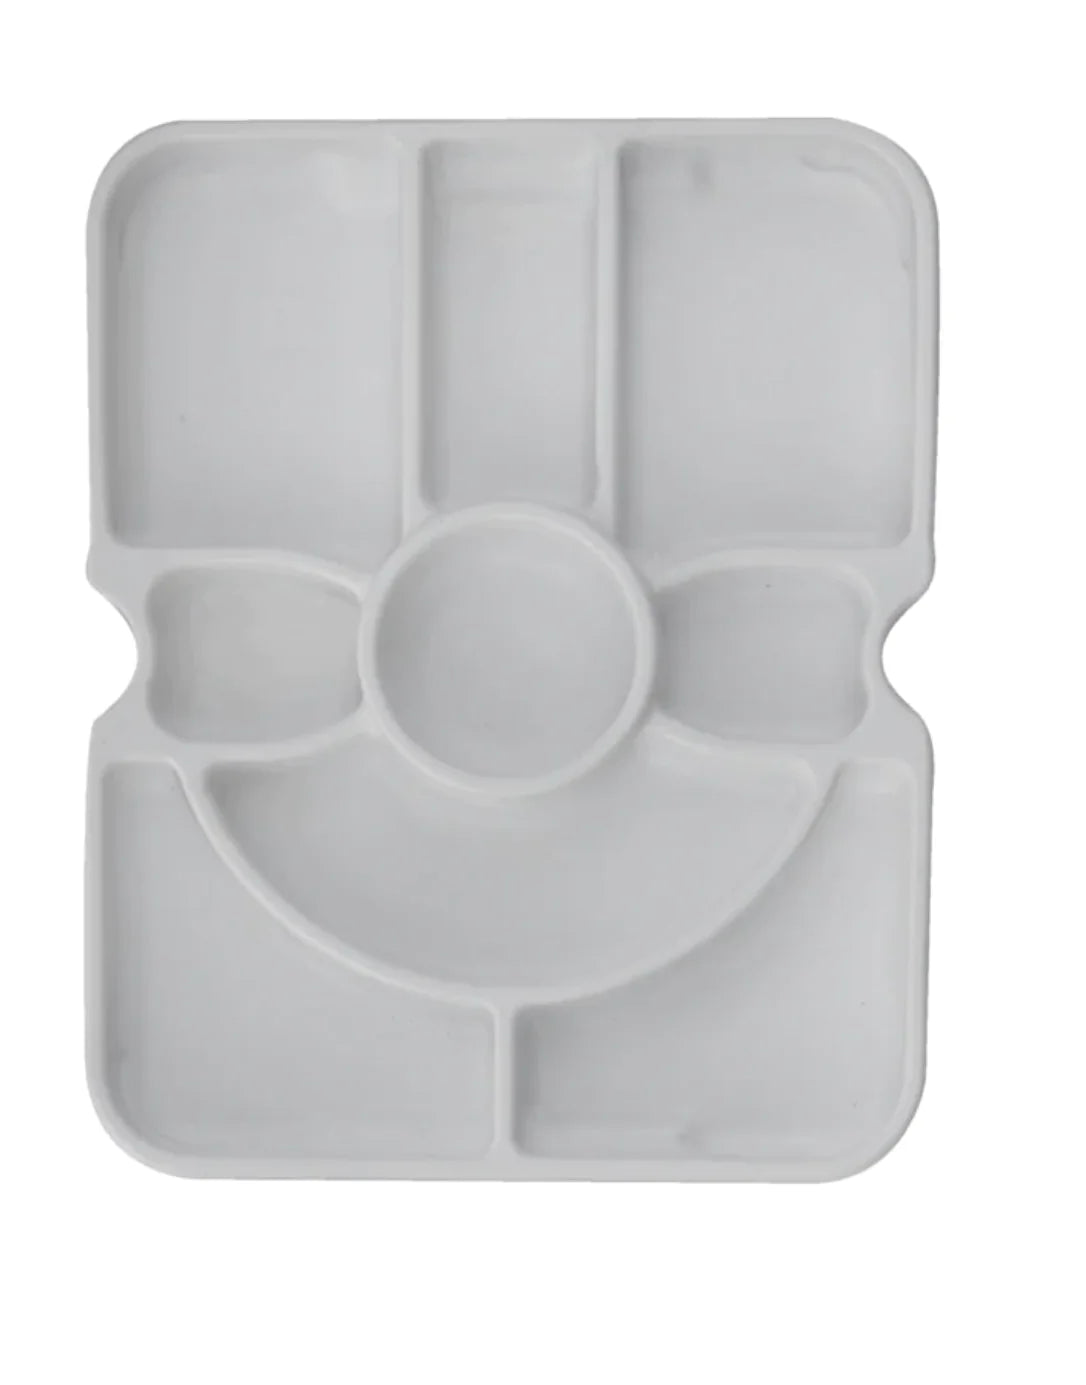 Foam Plates White Polystyrene Dishes 10 (26cm) for Birthday Party Catering